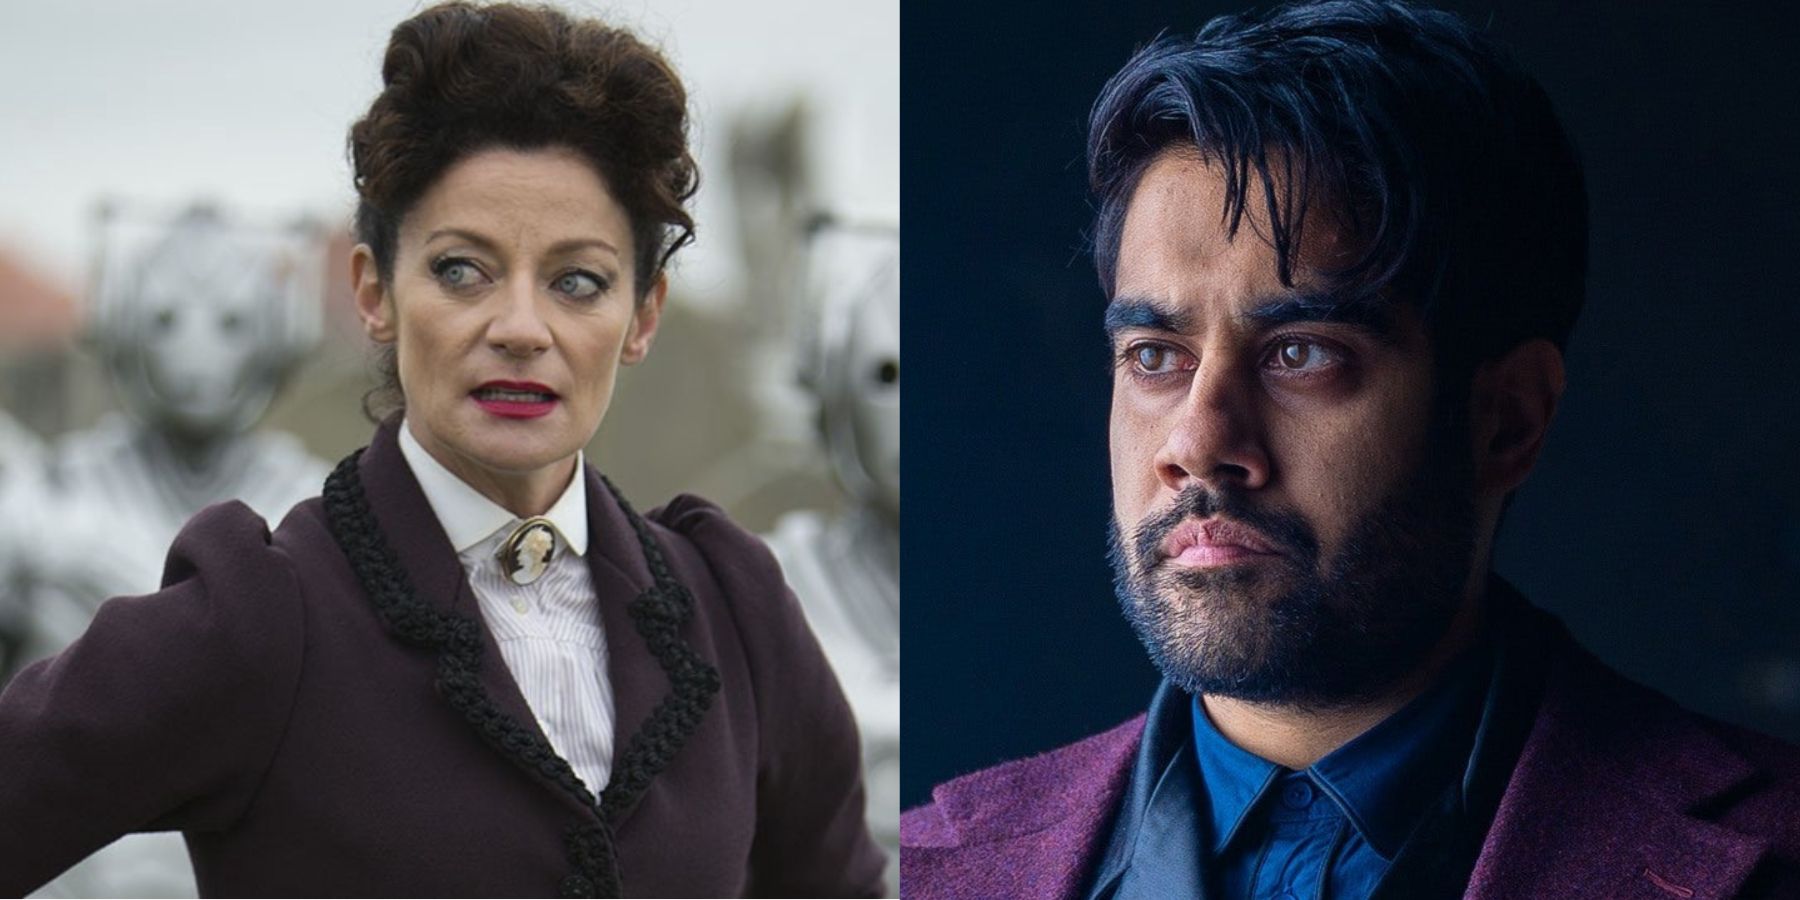 Left: Michelle Gomez as Missy; right: Sacha Dhawan as the Master